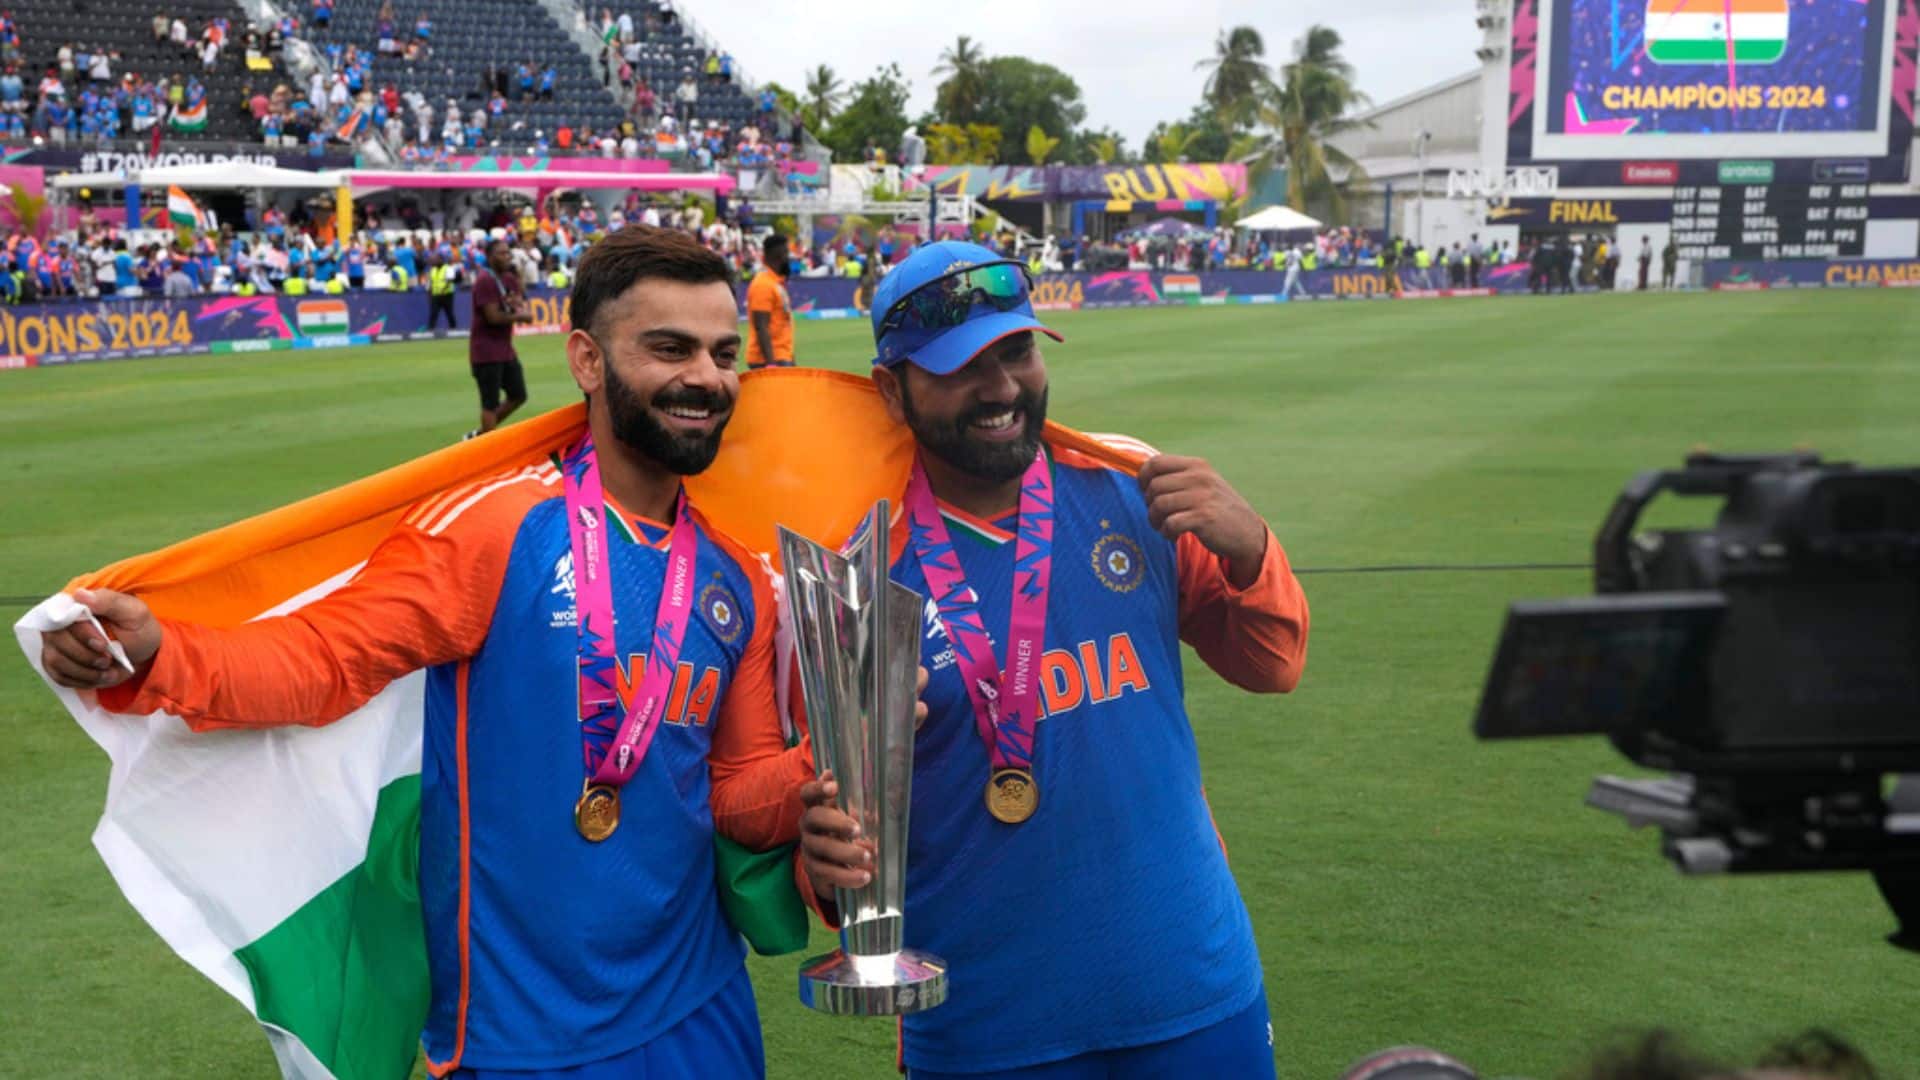 'Seniors Will Be There' - Jay Shah Confirms Rohit & Kohli's Participation In Champions Trophy 2025